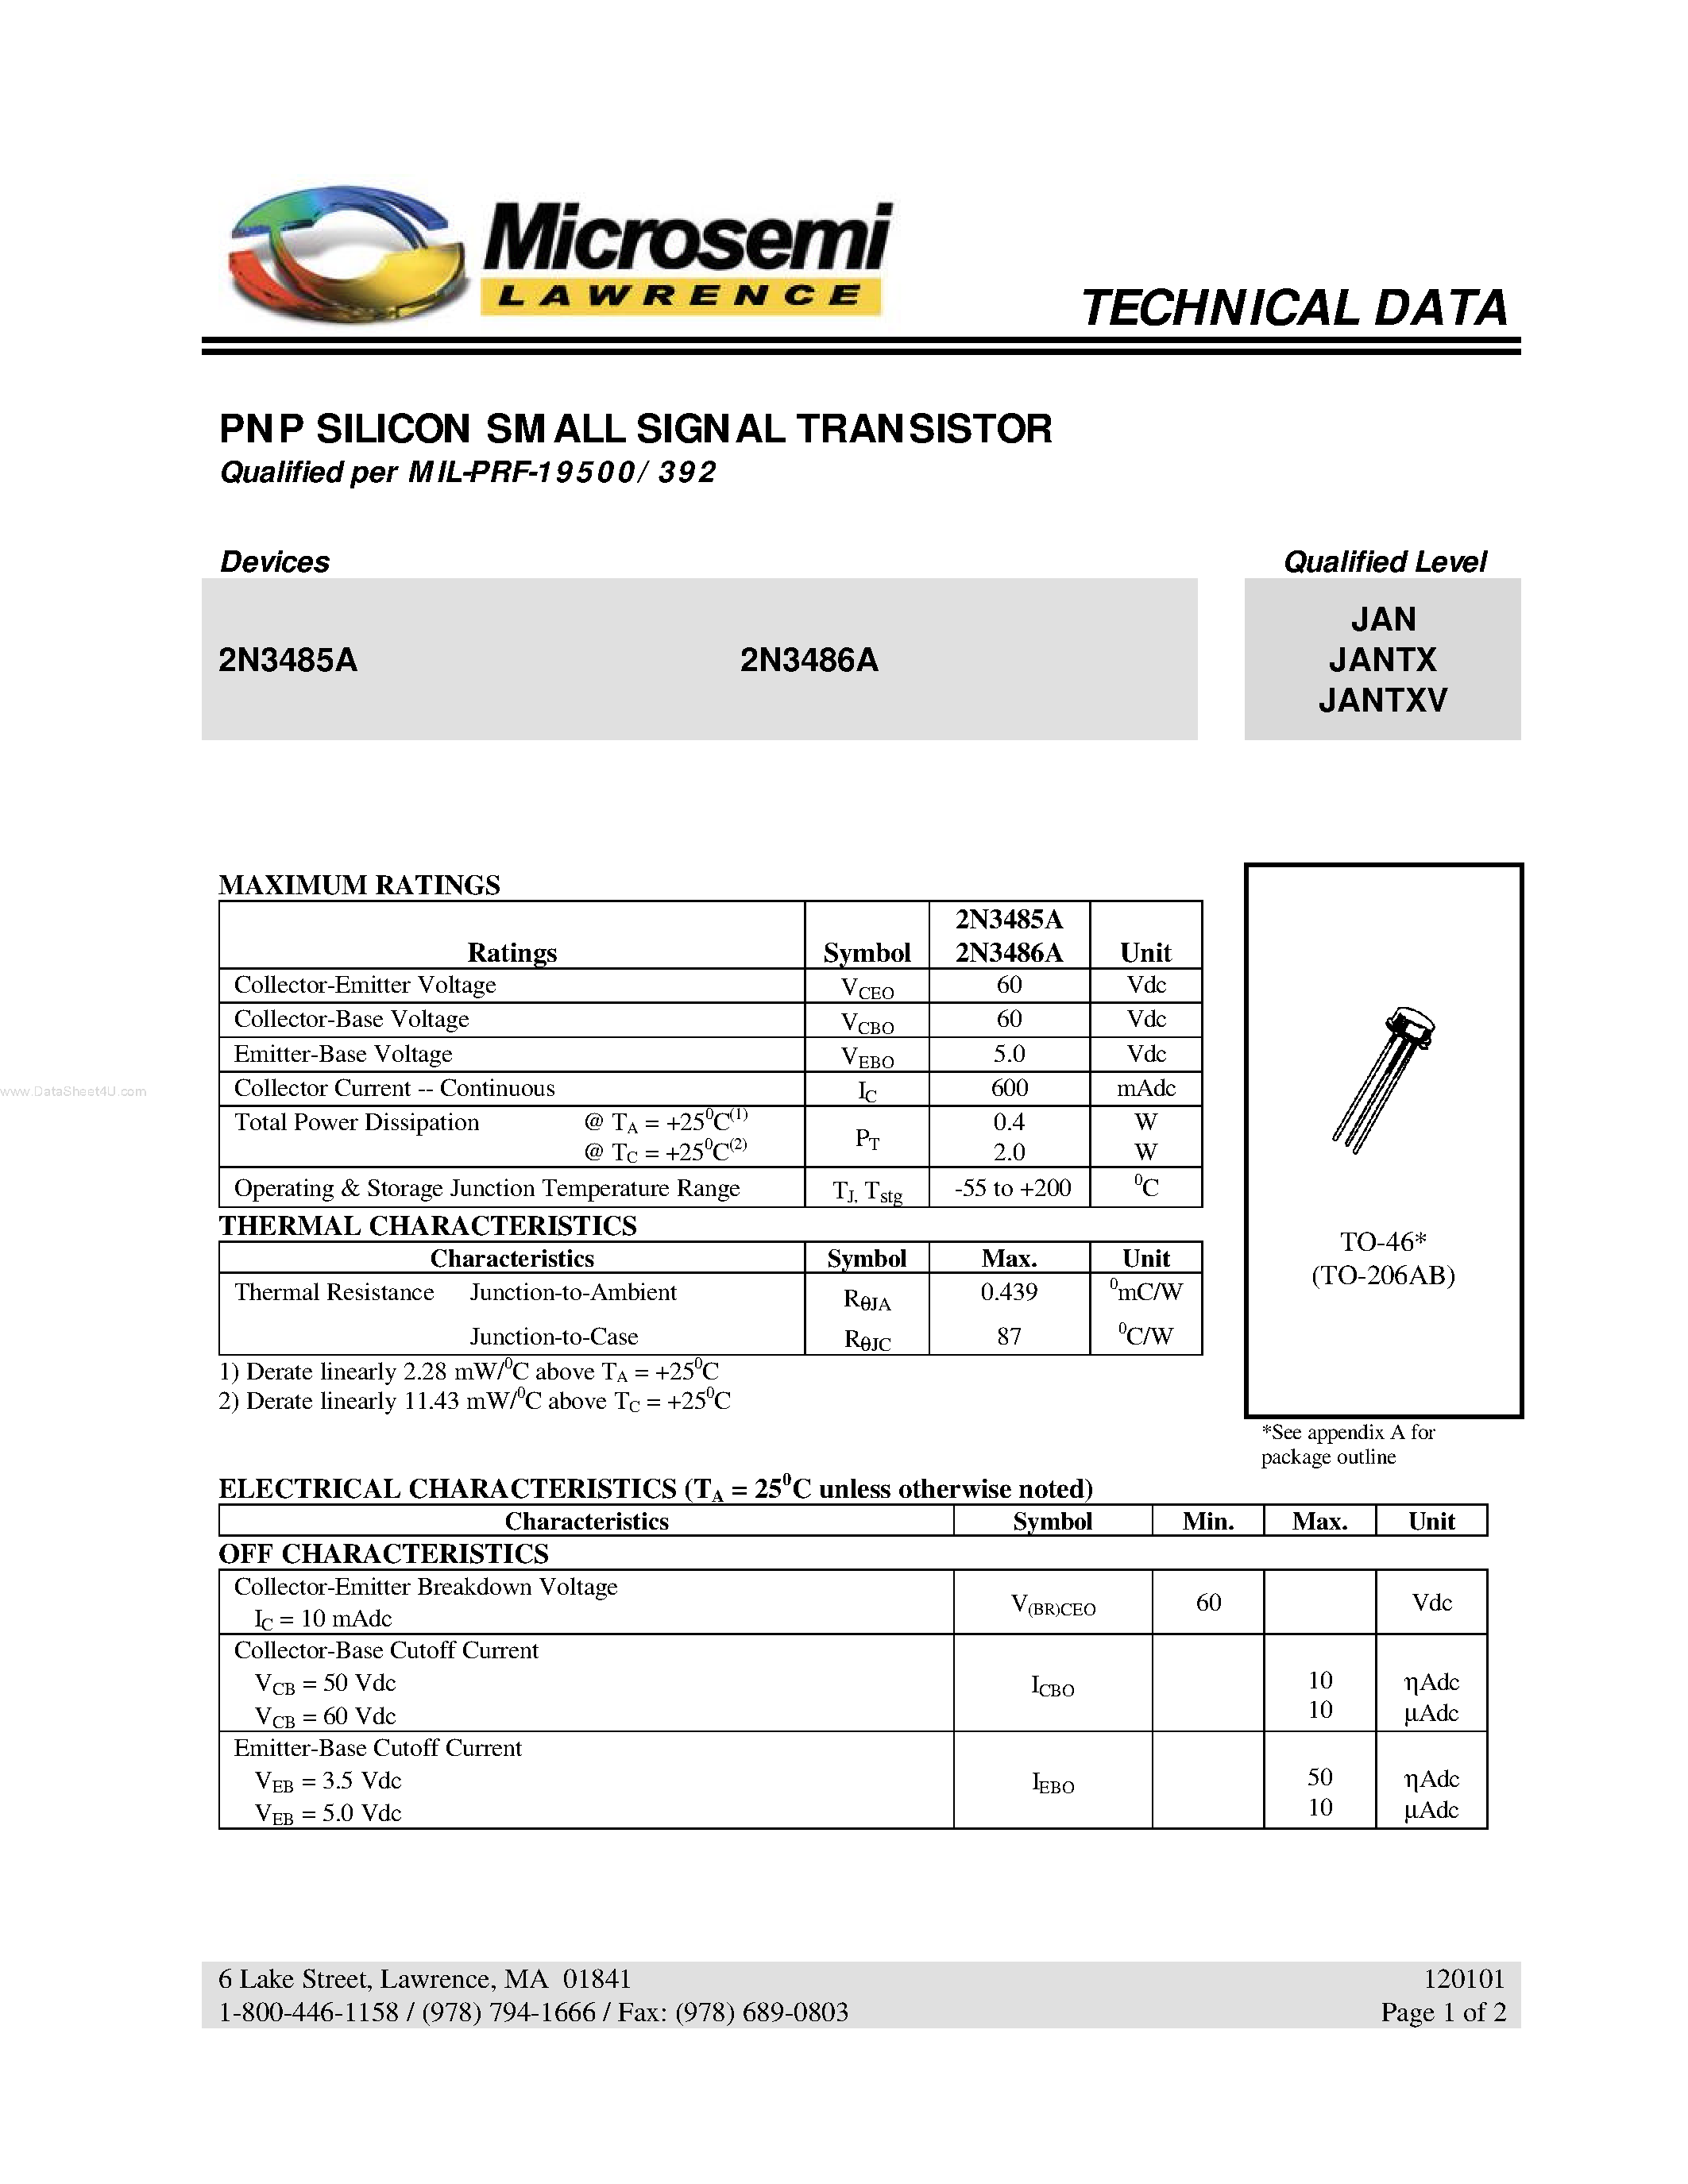 Datasheet 2N3485A - (2N3485A / 2N3486A) PNP SILICON SMALL SIGNAL TRANSISTOR page 1